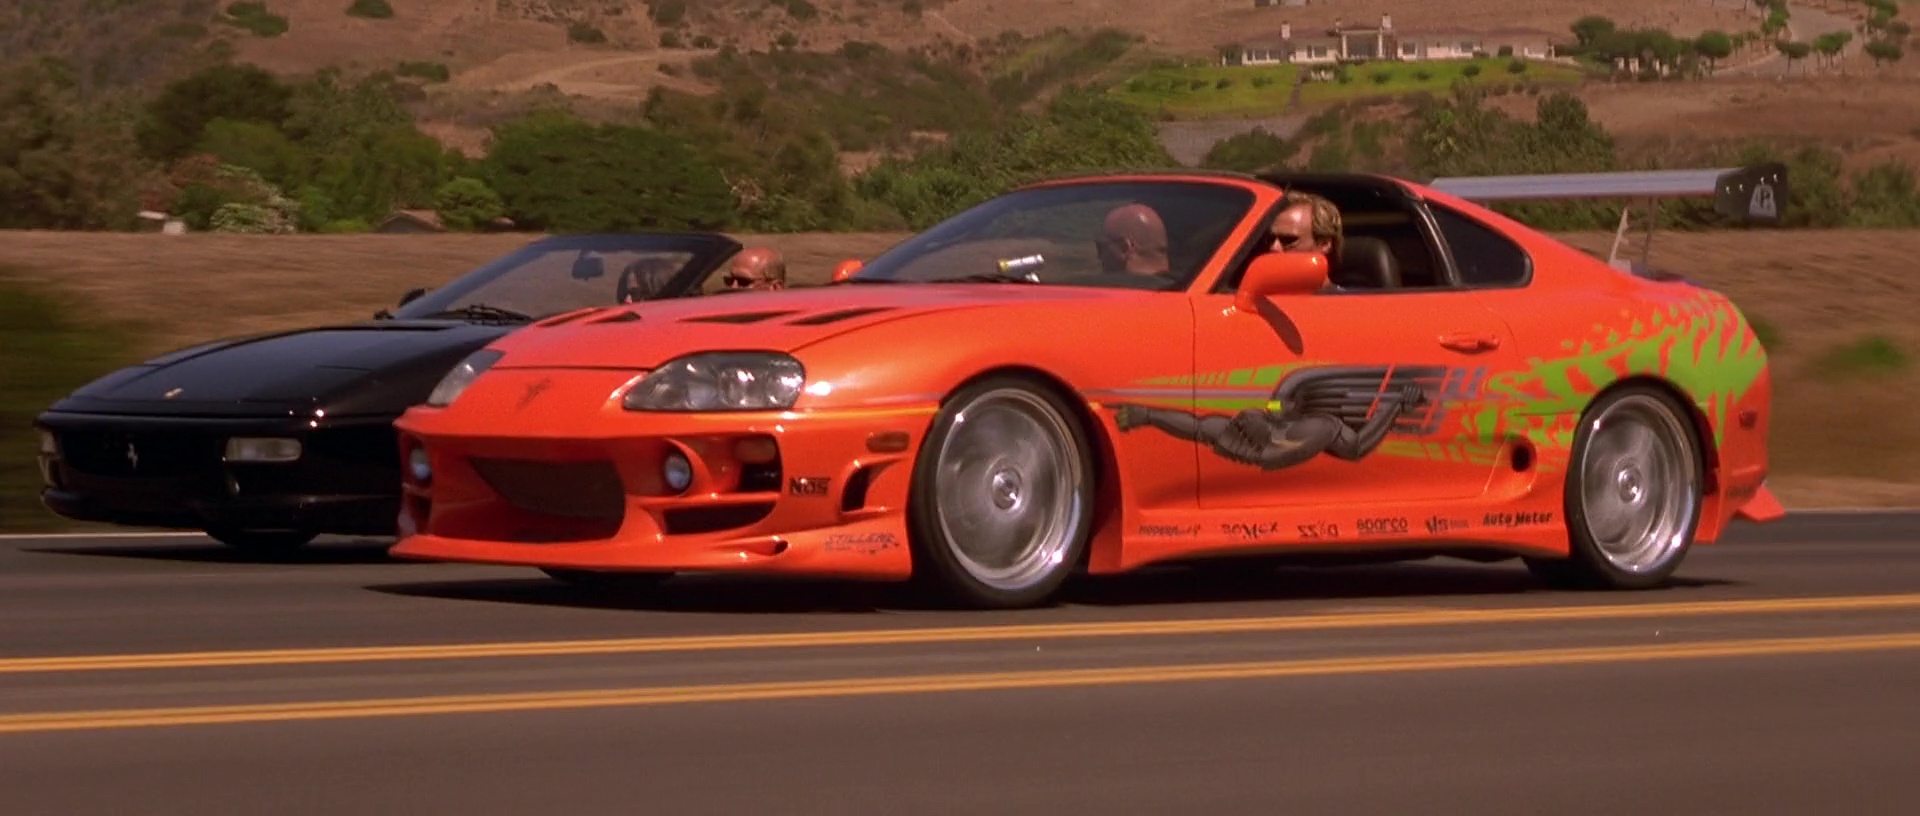 1994 Toyota Supra MK IV, The Fast and the Furious Wiki